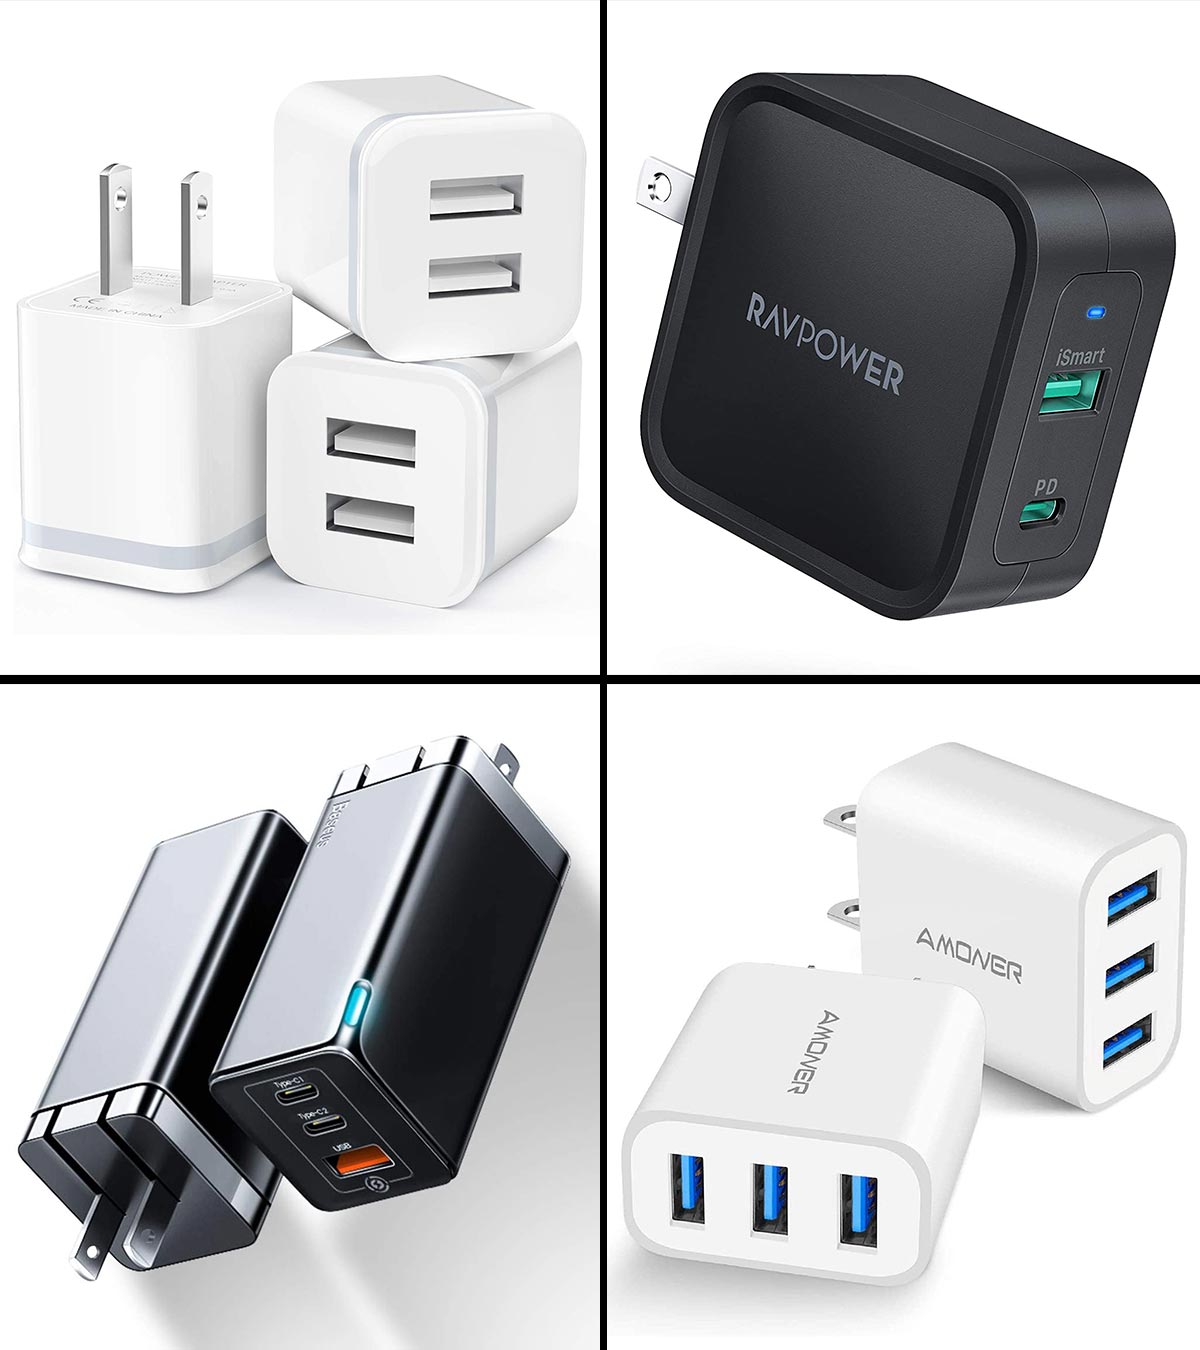 USB wall chargers: Here are our picks for the best ones